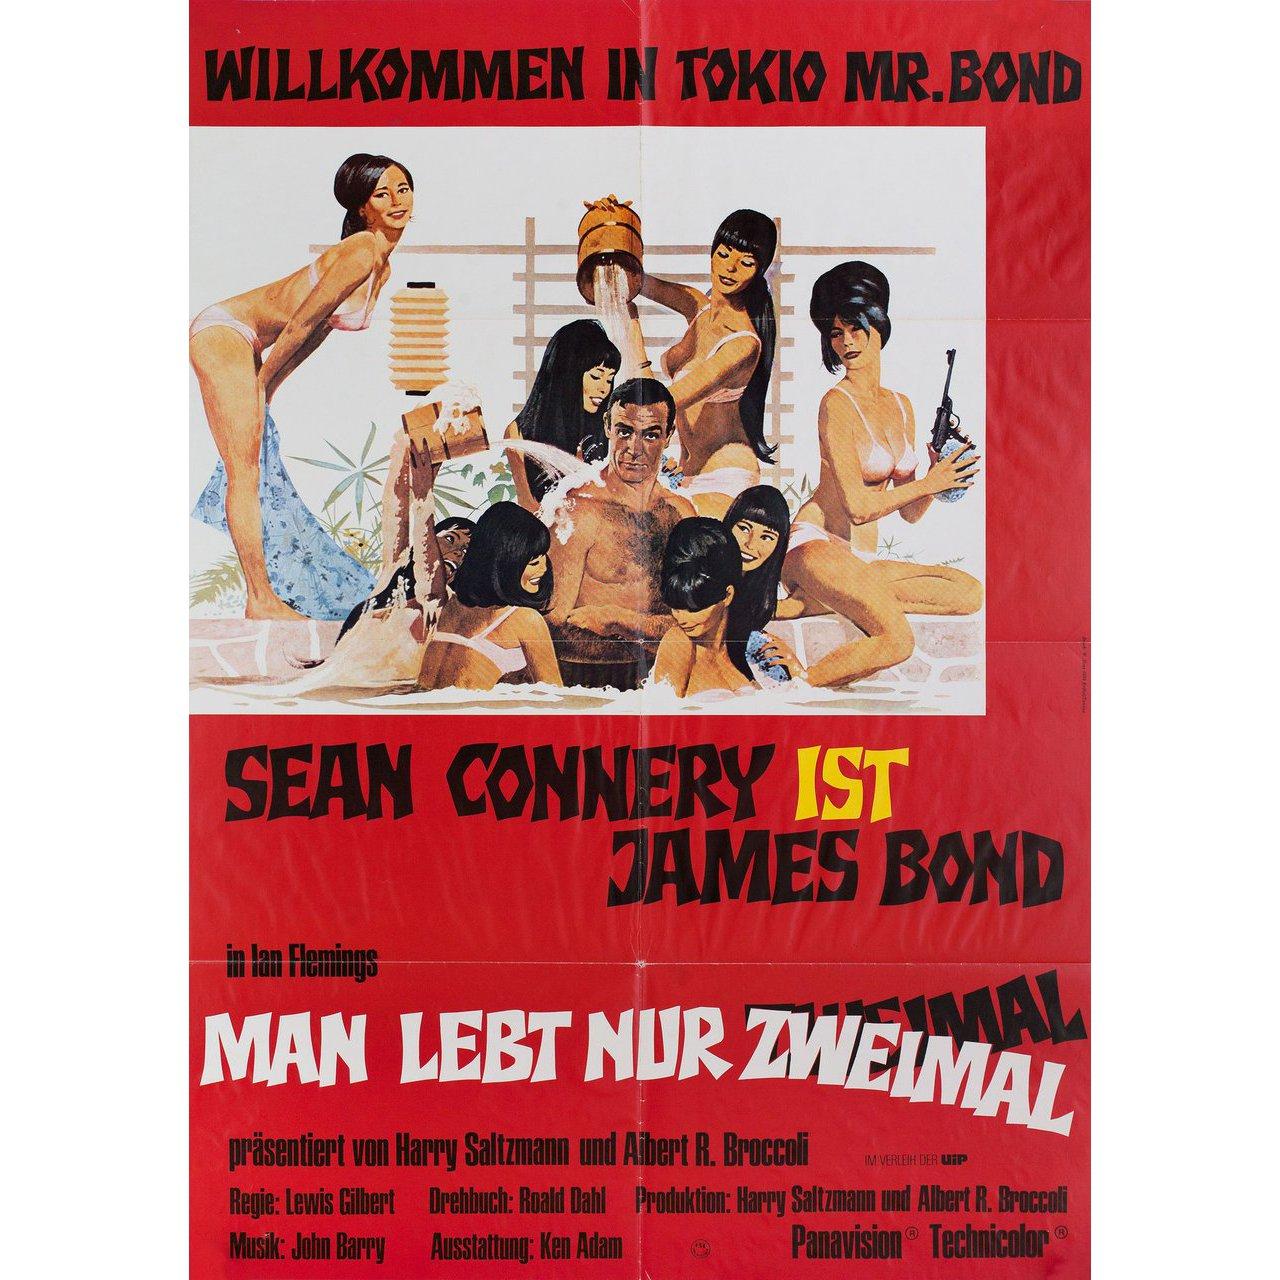 Original 1973 re-release German A1 poster by Robert McGinnis / Frank McCarthy for the 1967 film You Only Live Twice directed by Lewis Gilbert with Sean Connery / Akiko Wakabayashi / Mie Hama / Tetsuro Tanba. Very Good condition, folded with slight